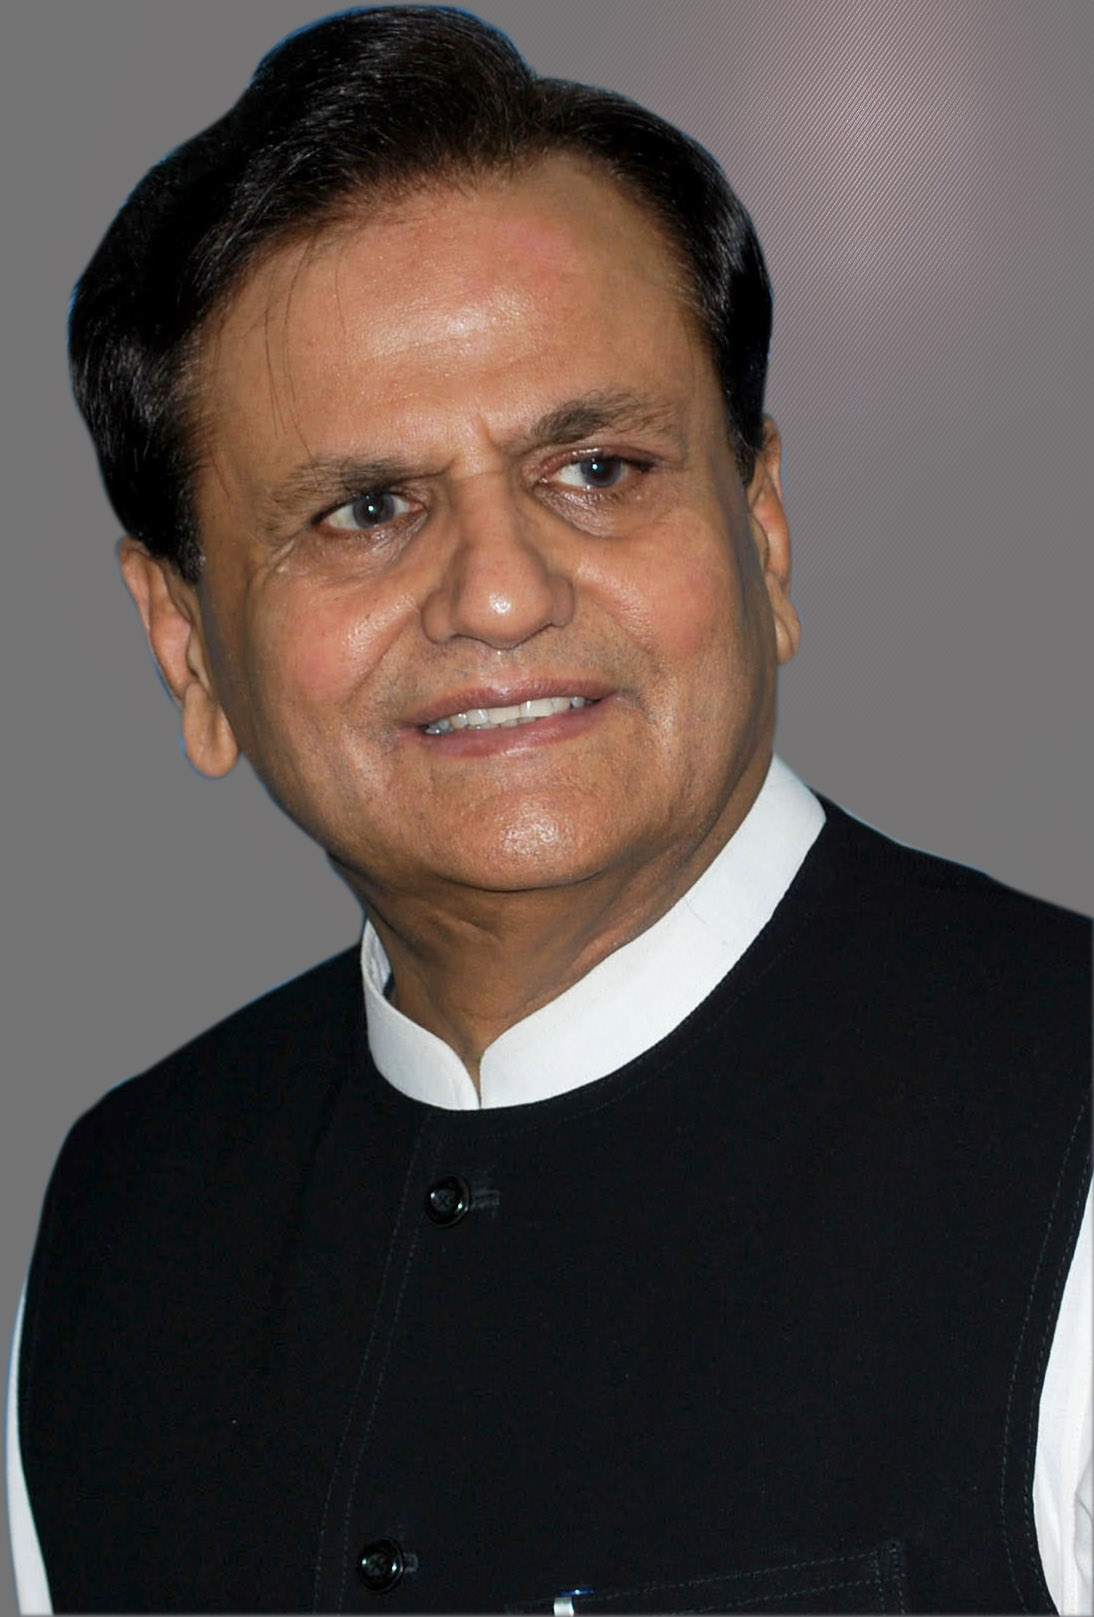 Ahmed Patel accuses EC of helping Modi govt use public money for campaigns